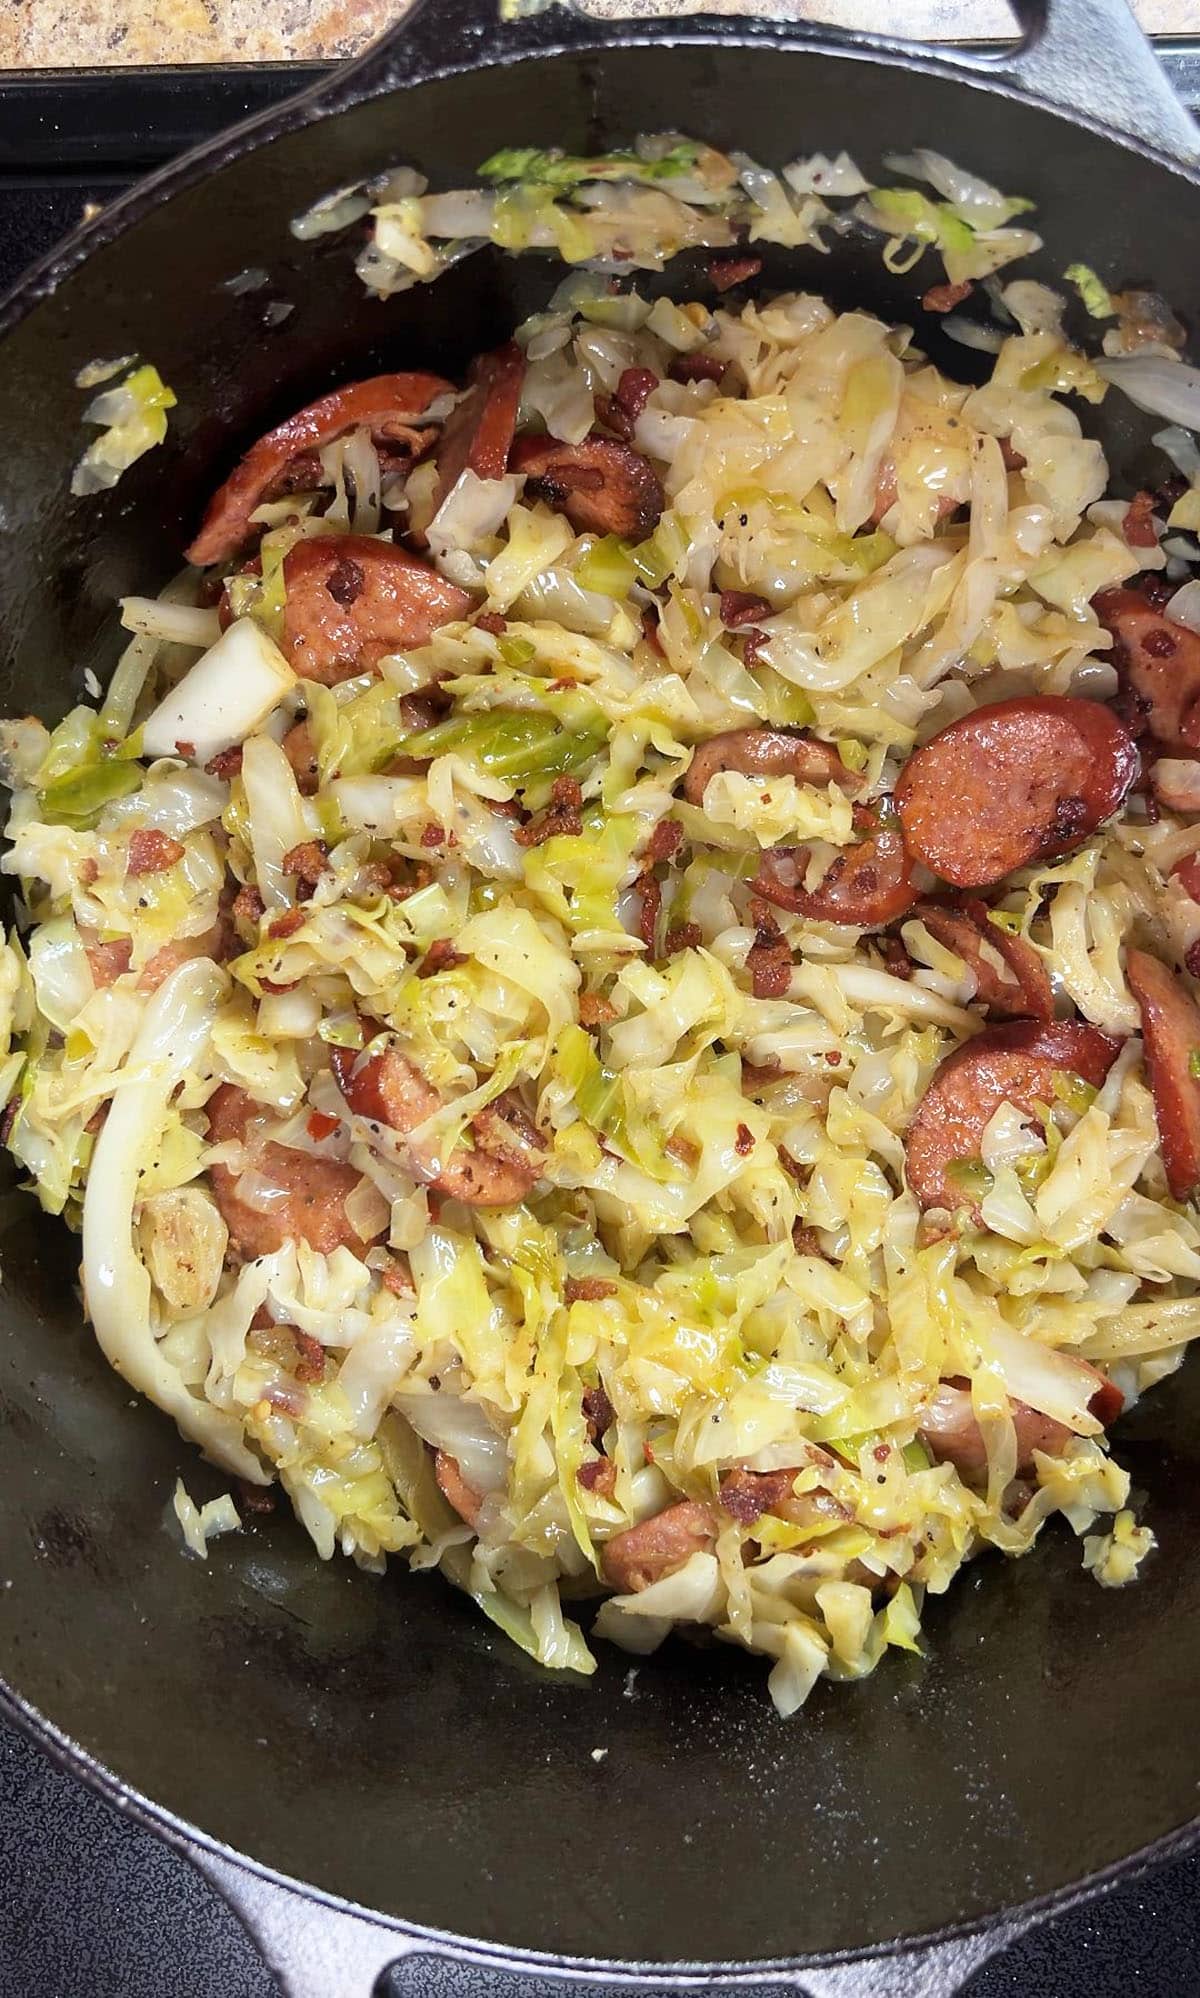 Completed cabbage and smoked sausage in a large Dutch oven.